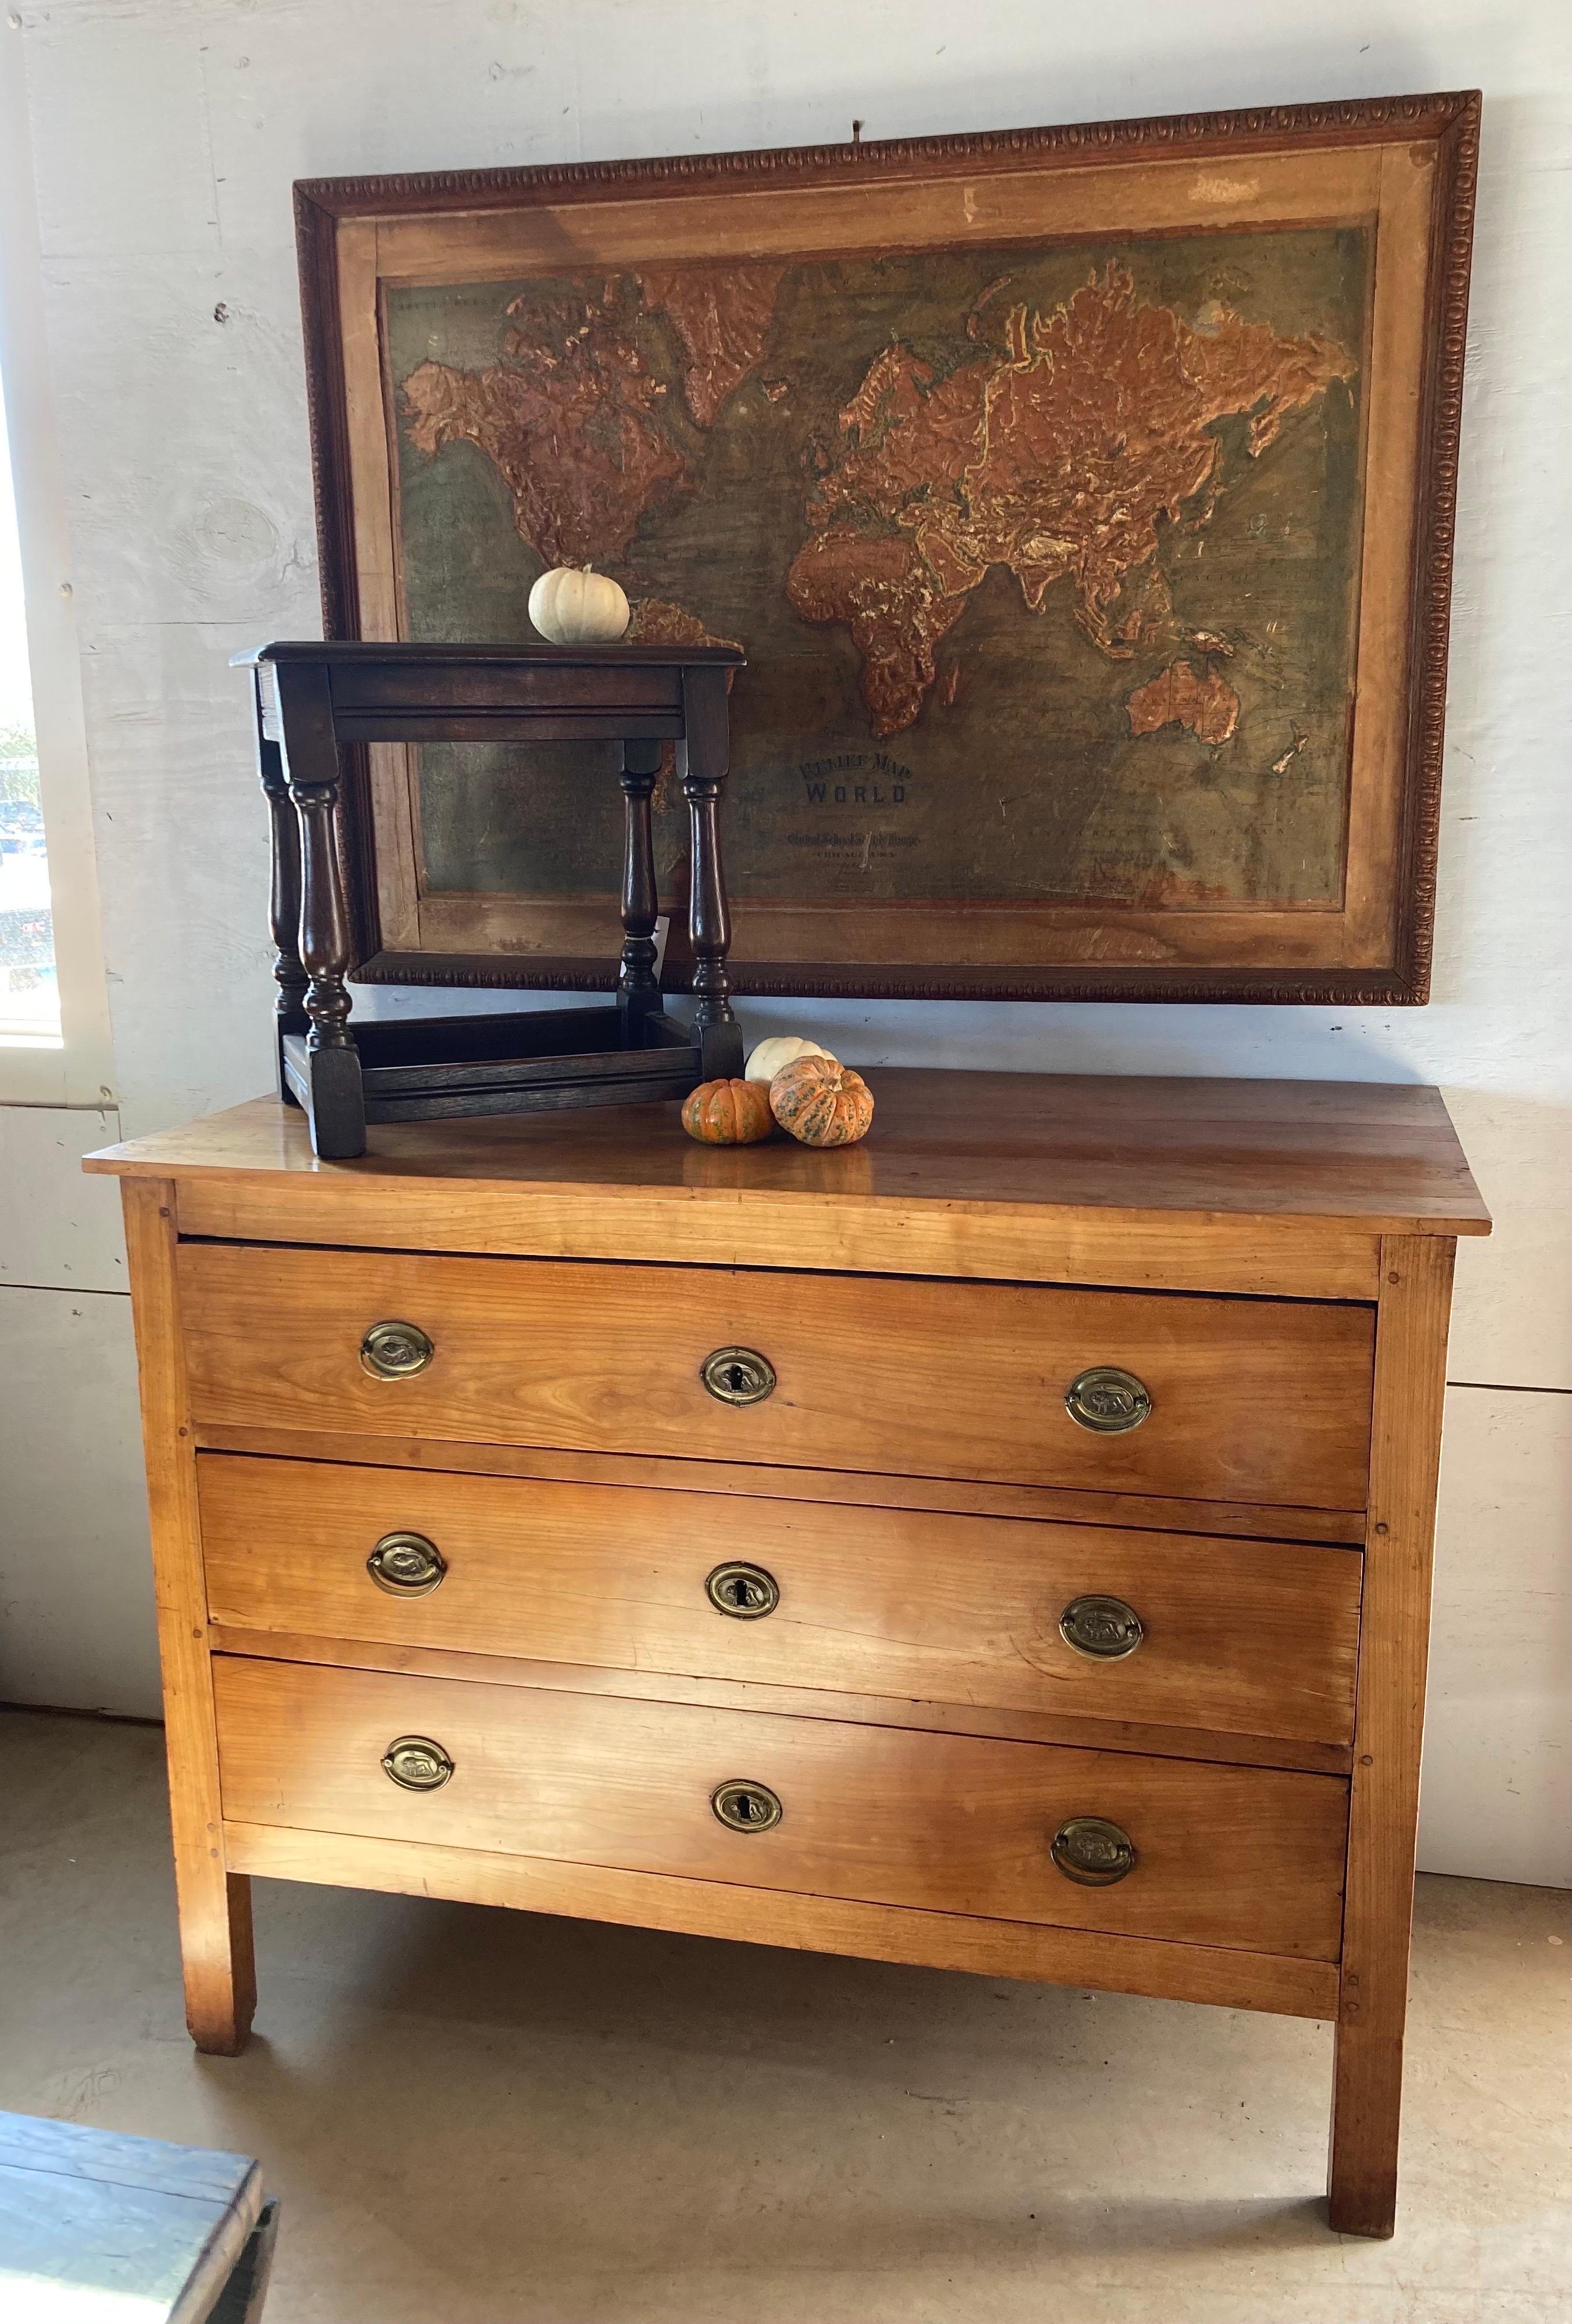 Louis XVI French cherry commode hand-made using pegged construction in the early 1800s. This is an absolutely gorgeous chest with character, finish and proportions. The chest features large drawers inset in the frame, which still sits on its